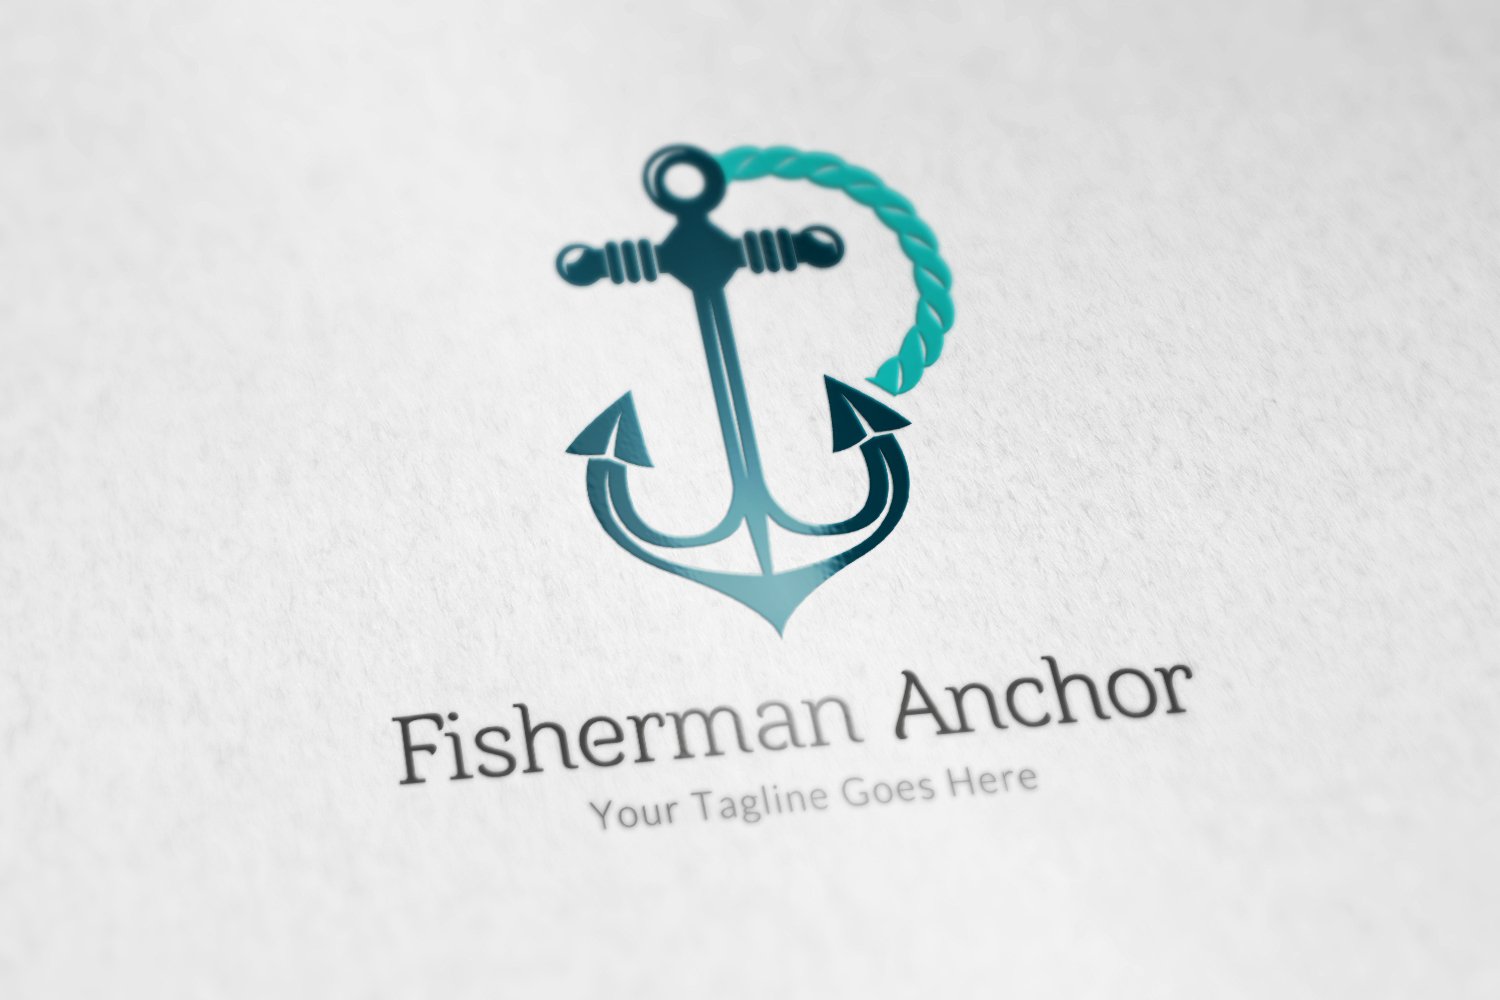 Matte white paper with a turquoise anchor logo.